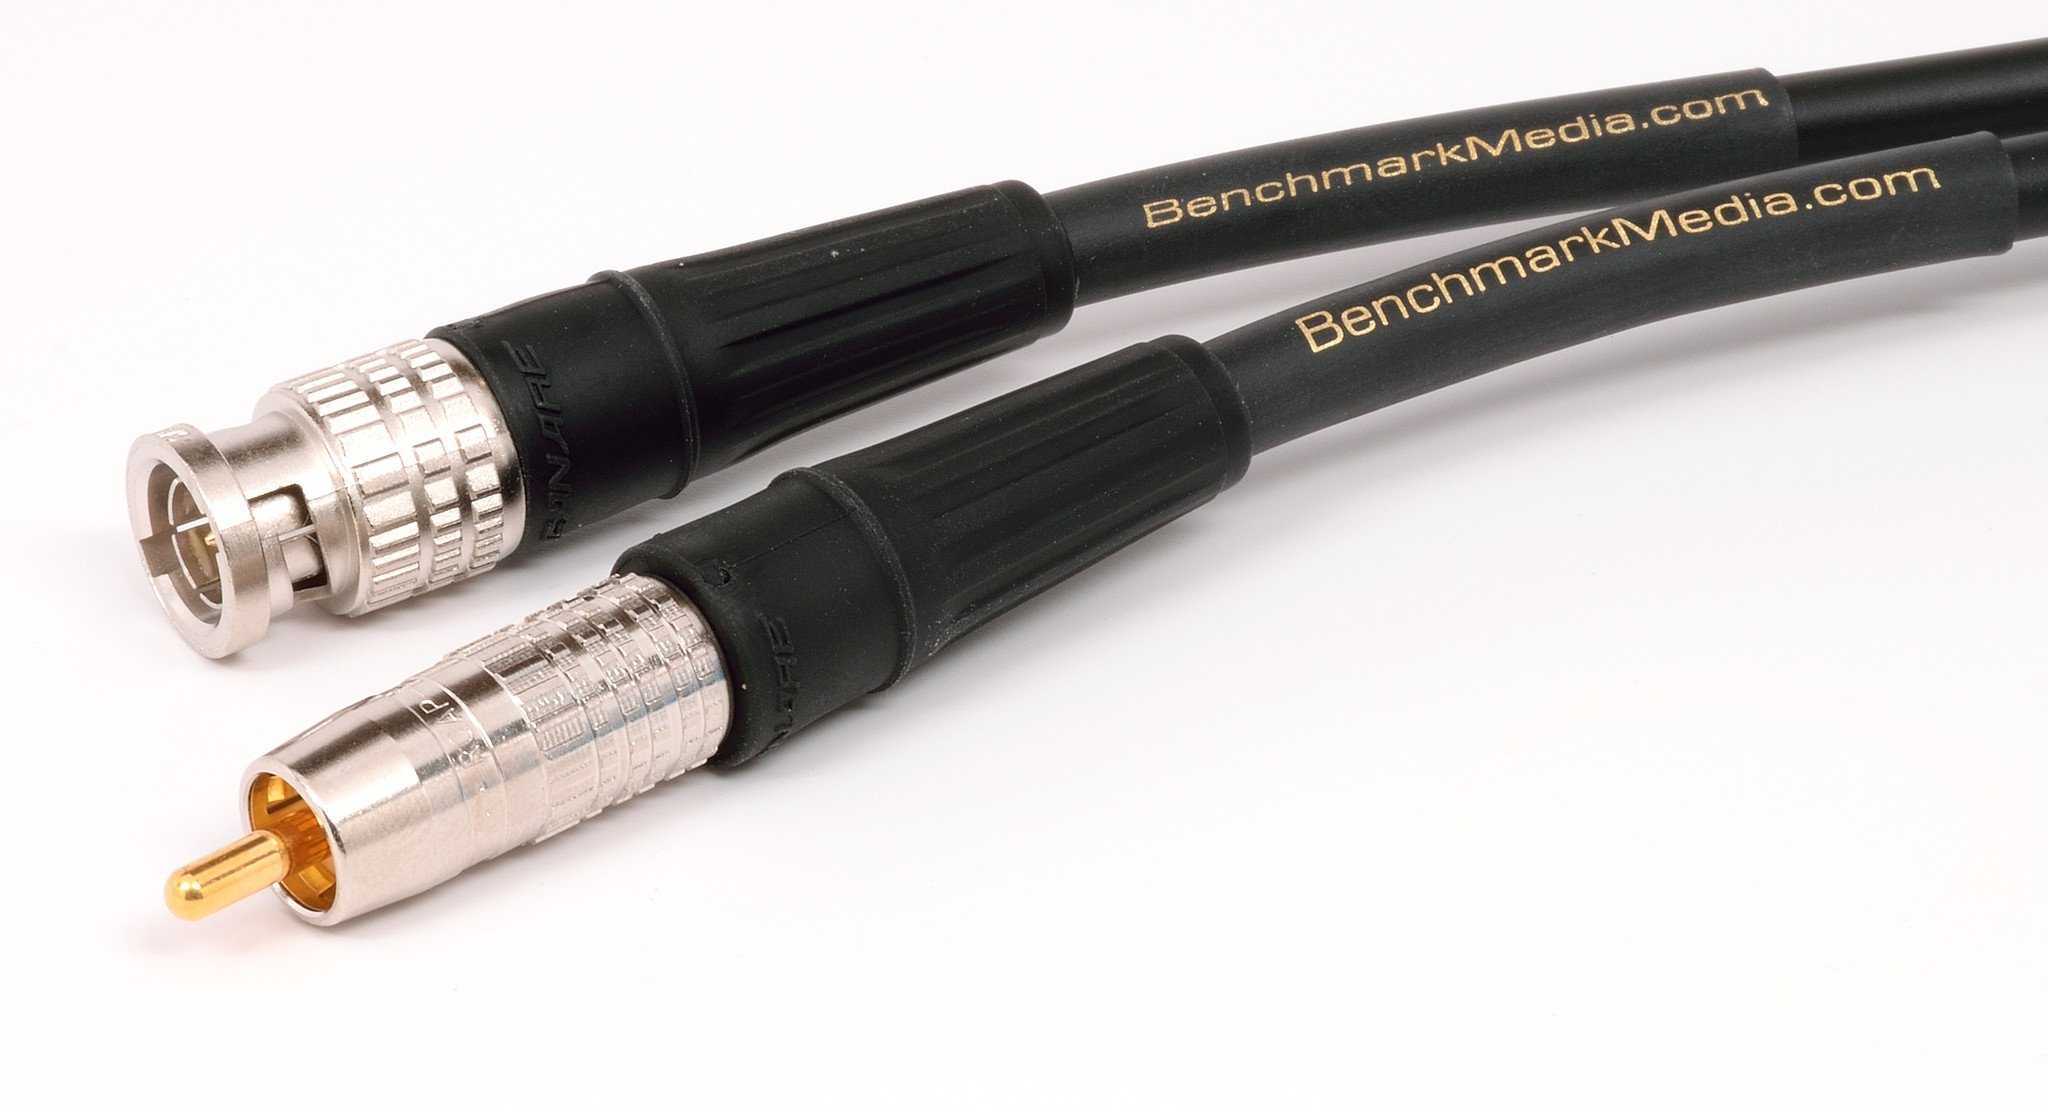 Benchmark BNC to RCA Coaxial Cable for Digital Audio or Analog Video ...